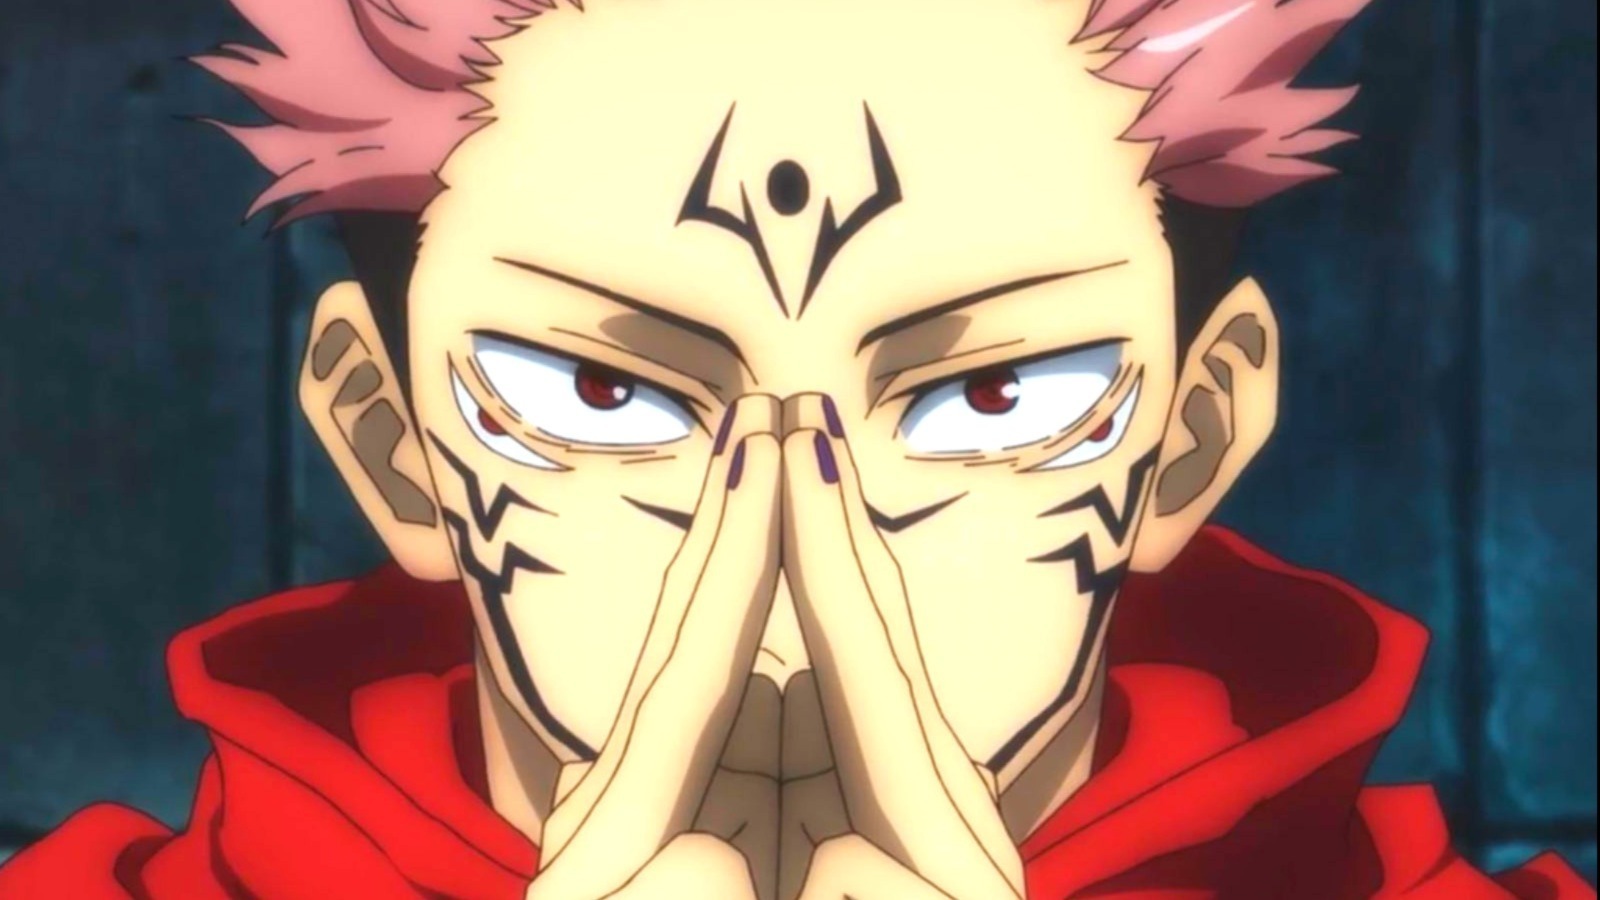 Jujutsu Kaisen Season 2 Release Date, Cast And Plot - What We Know So Far